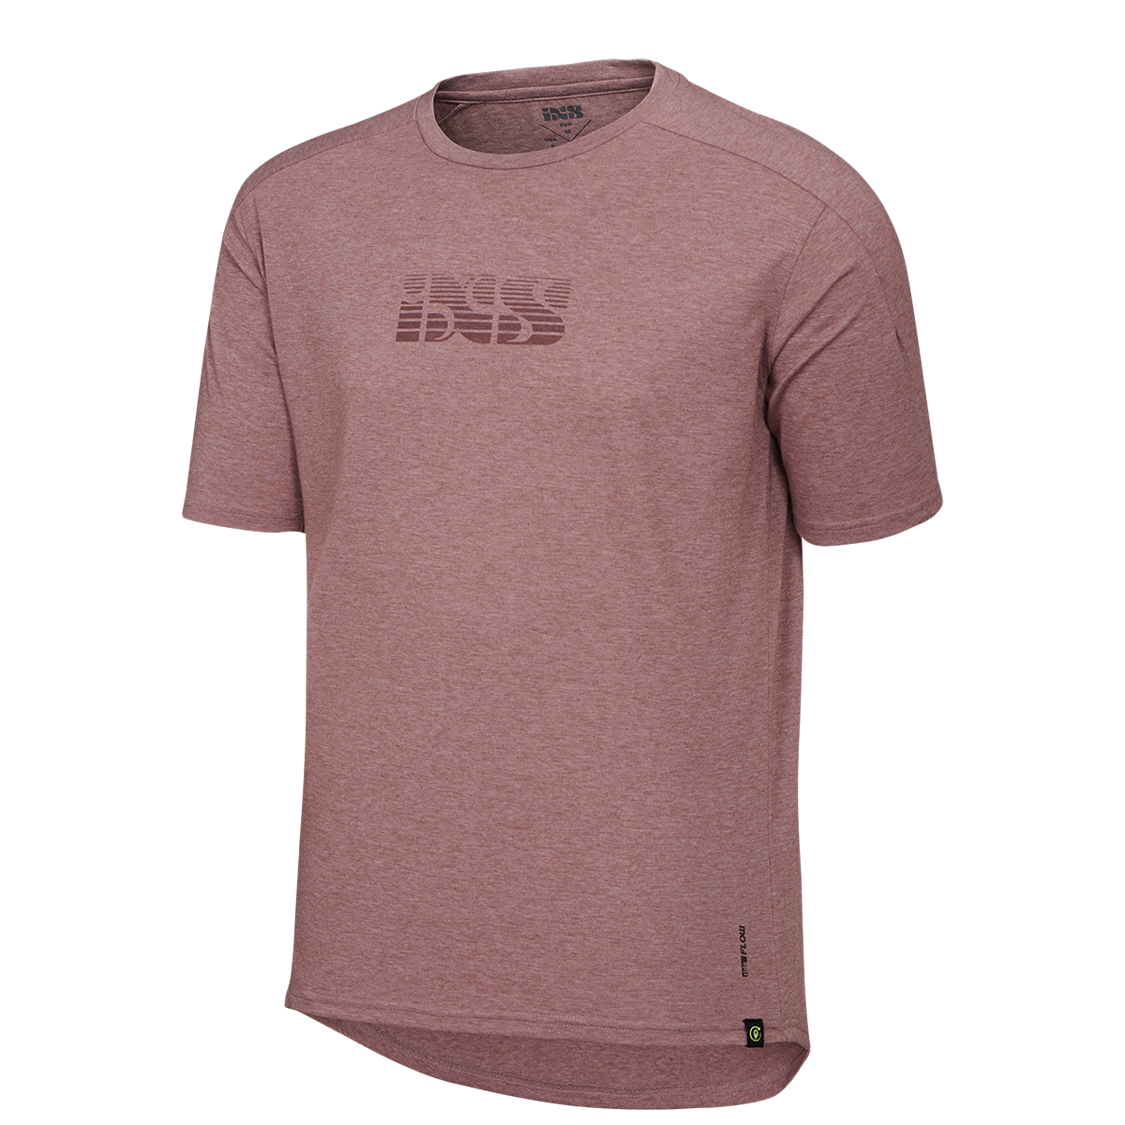 473-510-3351-155_01_Flow Fade Tech Tee Taupe